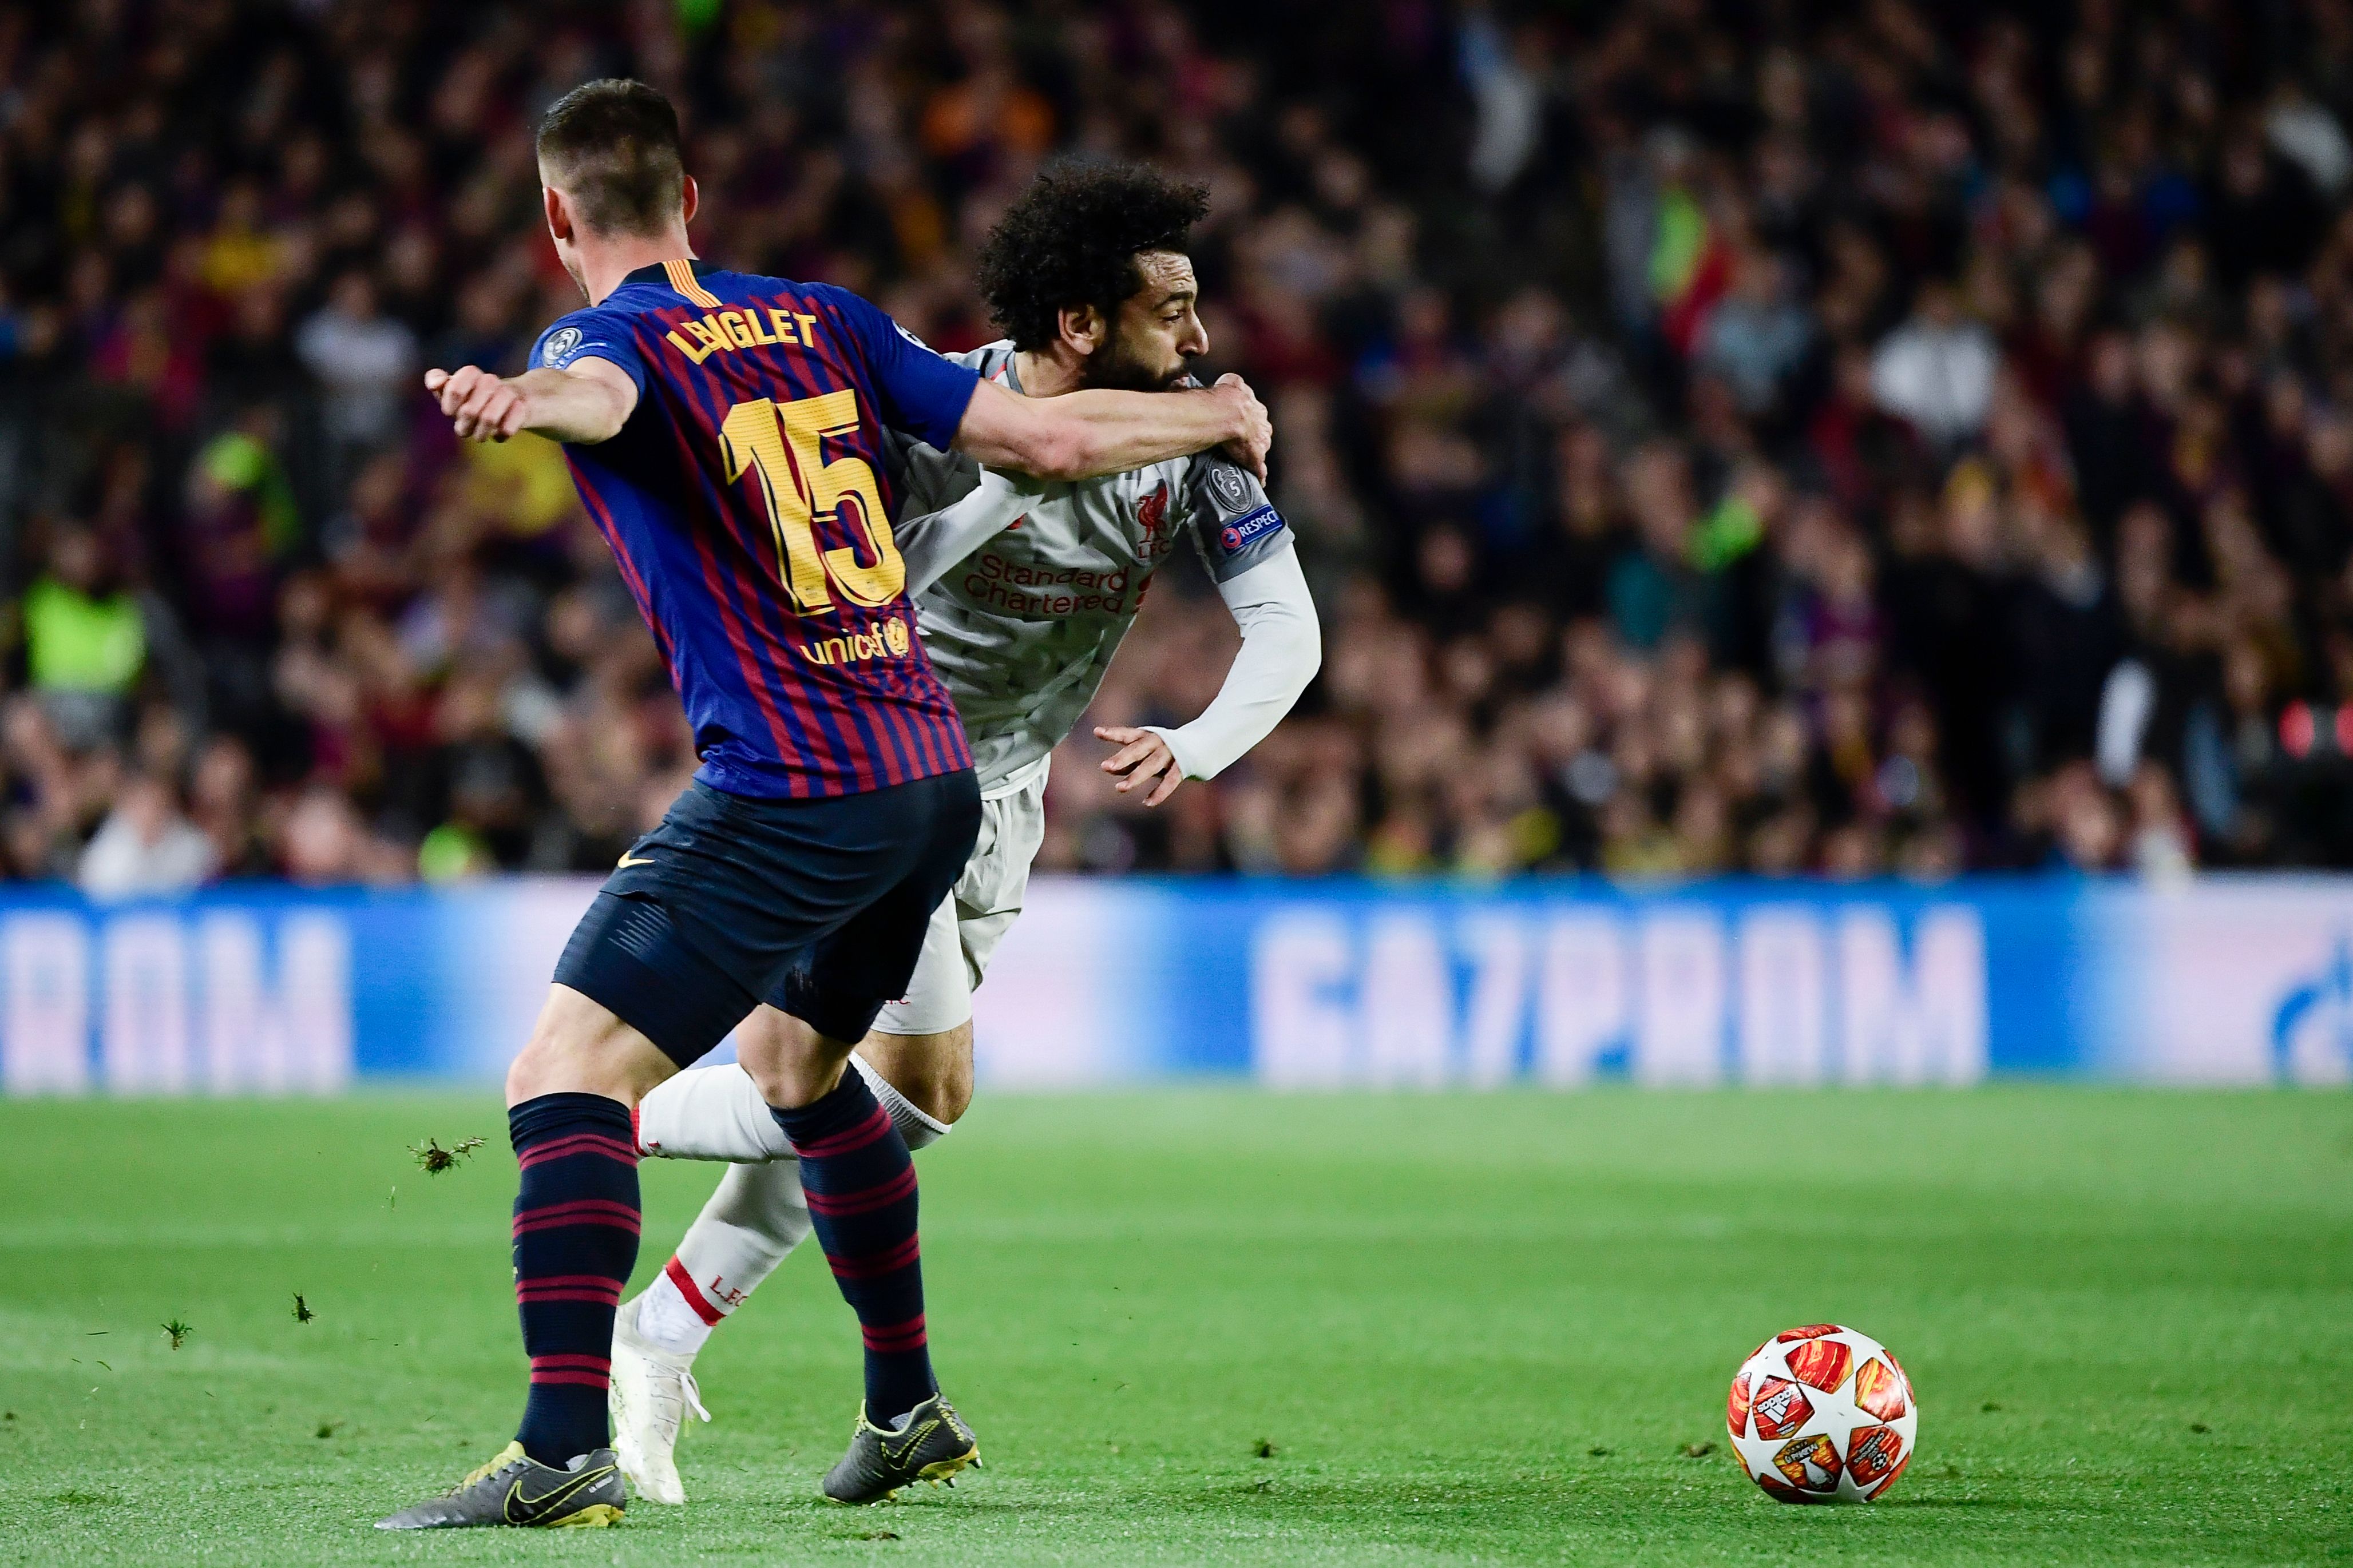 Lenglet struggled against the tricky Salah. (Photo by Javier Soriano/AFP/Getty Images)